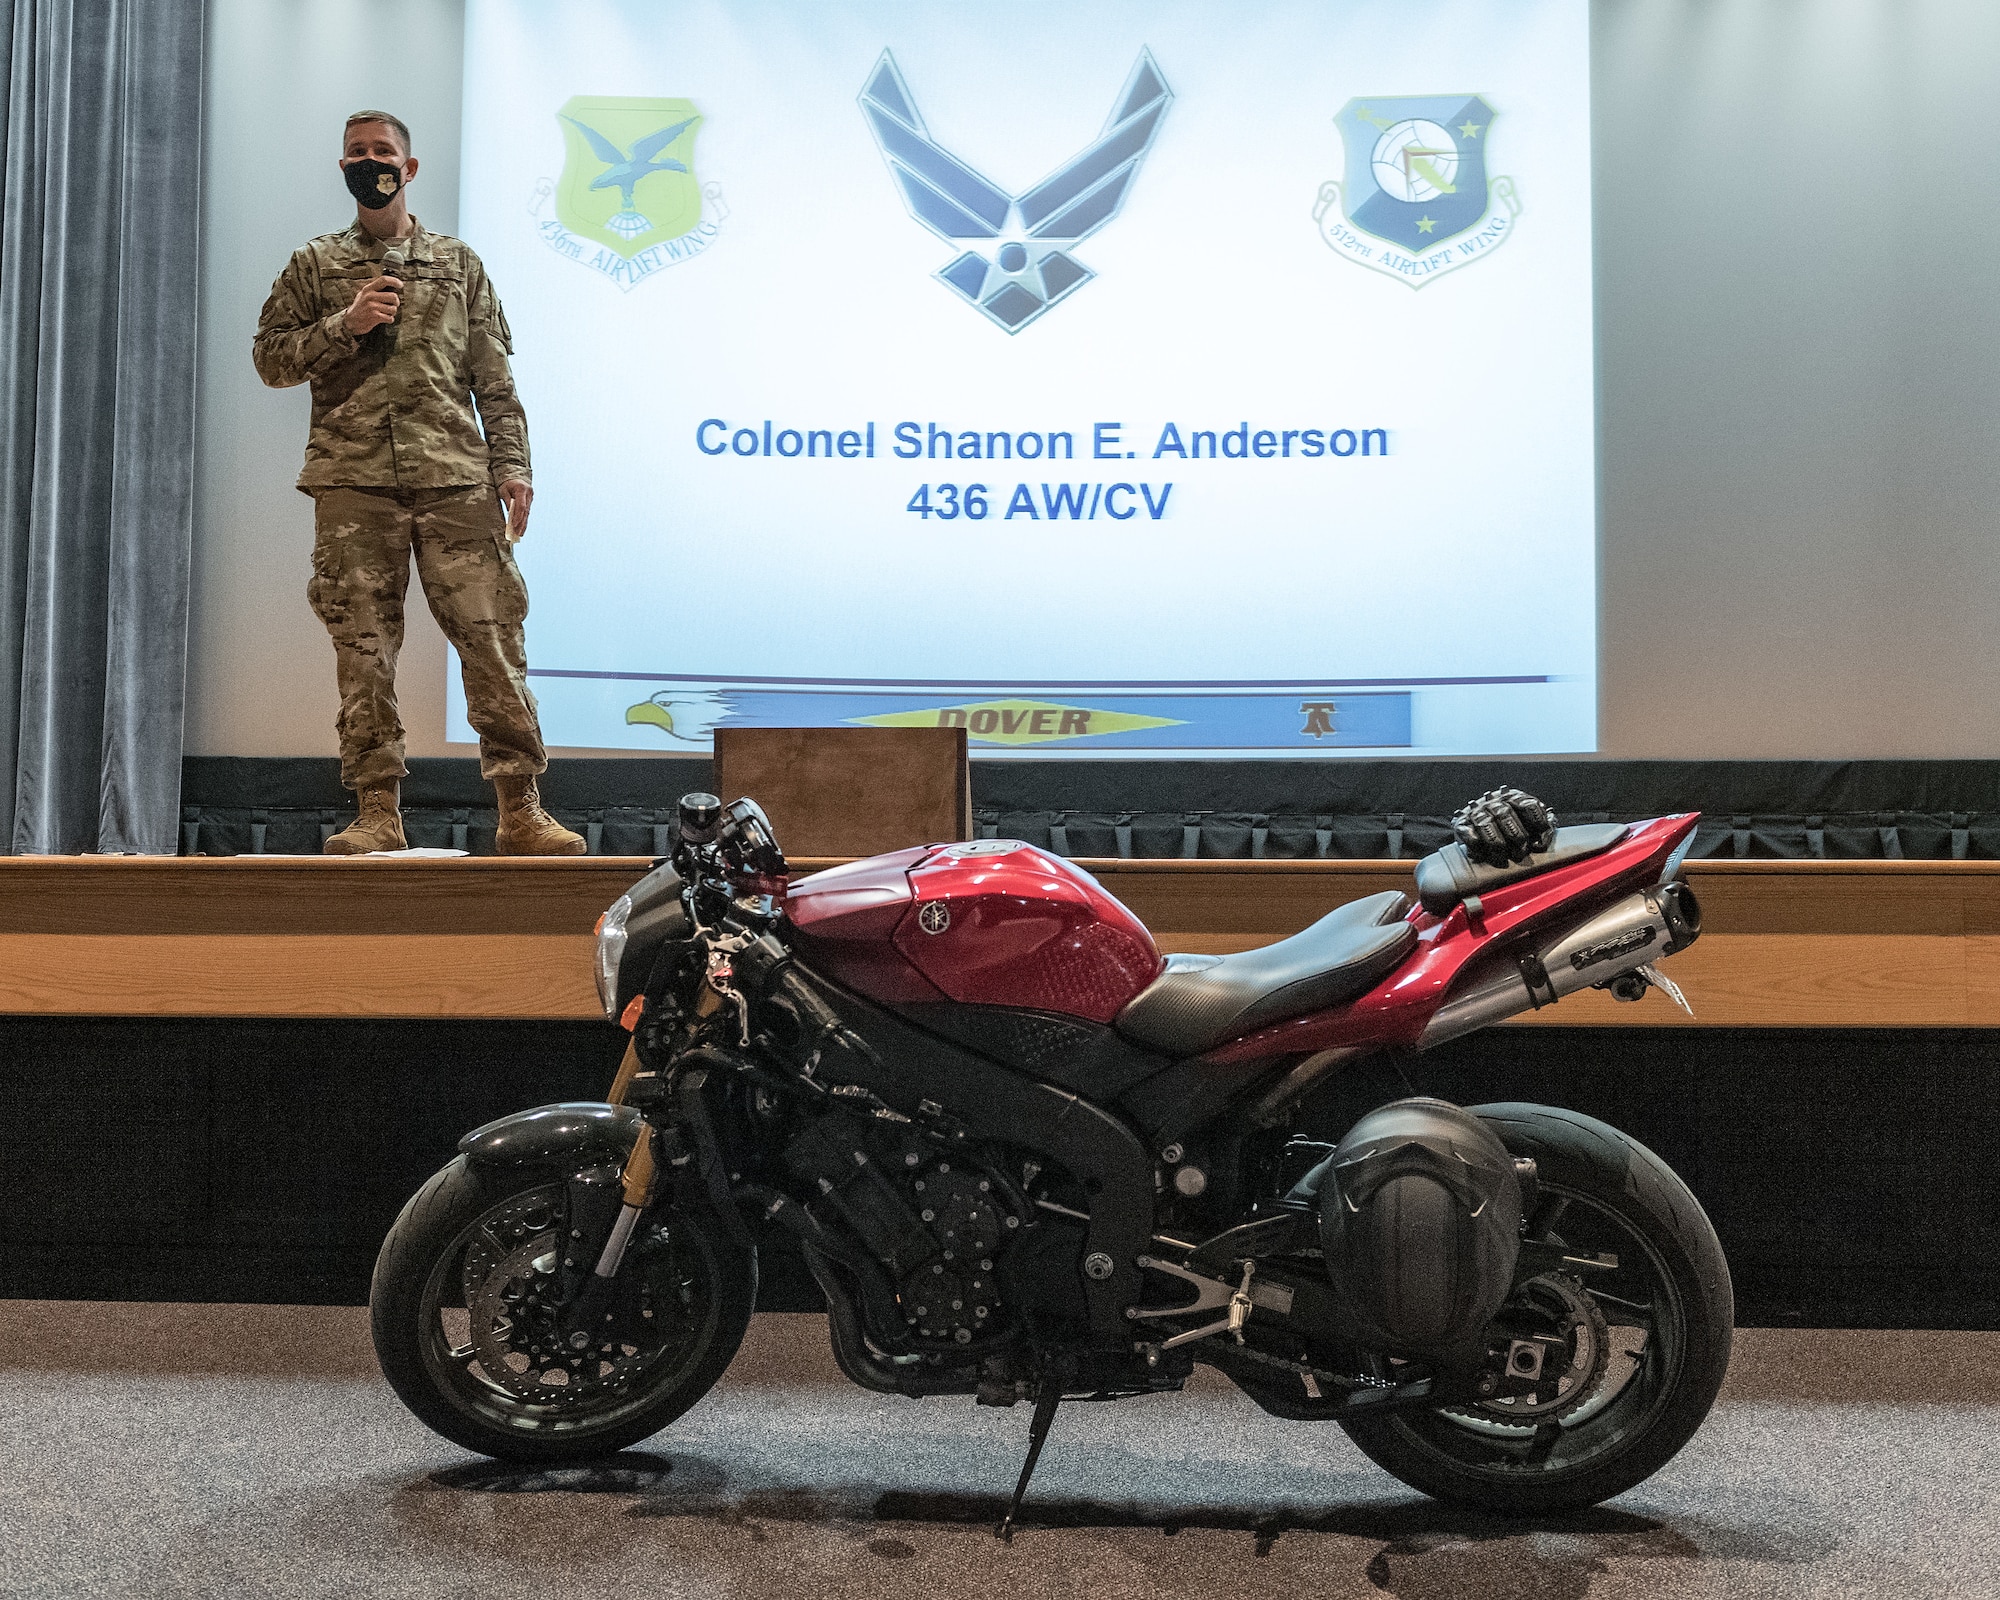 Col. Shanon Anderson, 436th Airlift Wing vice commander, makes opening remarks during the 2021 motorcycle safety preseason briefing at the base theater on Dover Air Force Base, Delaware, April 2, 2021. More than 100 motorcyclists attended the briefing as part of the 436th AW Safety office’s motorcycle safety day. (U.S. Air Force photo by Roland Balik)